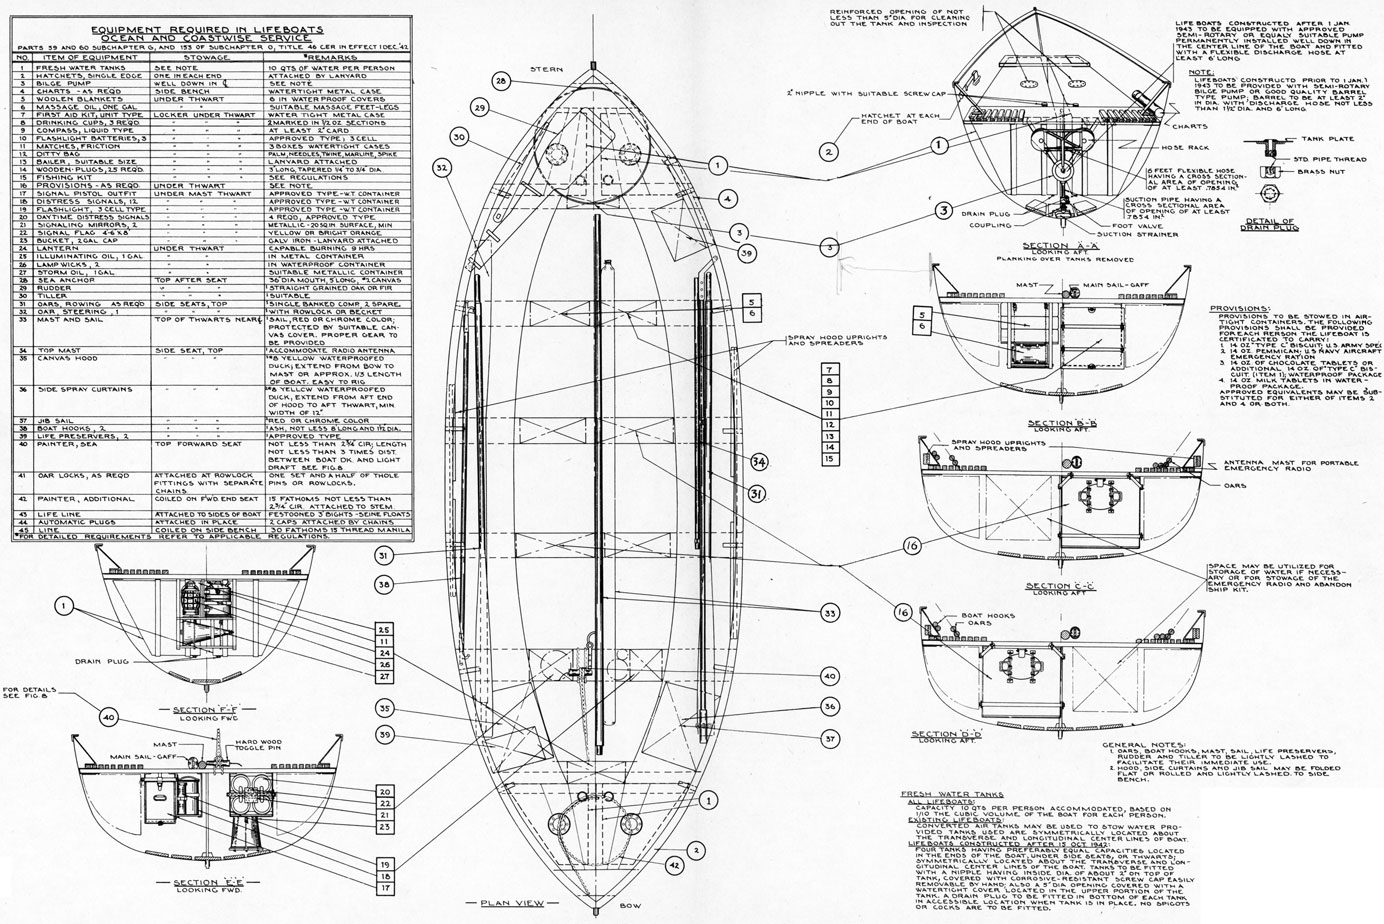 Lifeboat Equipment
LIFE SORTS CONSTRUCTED AFTER 1 JAN 1943 TO BE EQUIPPED WITH APPROVED SEMI- ROTARY OR EQUALLY SUITABLE PUMP PERMANENTLY INSTALLED WELL DOWN IN THE CENTER LINE OF THE BOAT AND FITTED WITH A FLEXIBLE DISCHARGE. HOSE AT LEAST 6' LONG

NOTE: LIFEBOATS CONSTRUCTED PRIOR TO I JAN. 1943 TO BE PROVIDED WITH SEMI-ROTARY BILGE PUMP OR GOOD QUALITY BARREL TYPE PUMP, BARREL TO BE AT LEAST 2' IN DIA. WITH DISCHARGE HOSE NOT LESS THAN 1 1/2' DIA. AND 6' LONG


EQUIPMENT REQUIRED IN LIFEBOATS
OCEAN AND COASTWISE SERVICE

PARTS 59 AND 60 SUBCHAPTER G, AND 153 OF SUBCHAPTER 0, TITLE 46 CER IN EFFECT I DEC. '42
NO.  ITEM OF EQUIPMENTSTOWAGE*REMARKS KS
1 FRESH WATER TANKS+SEE NOTE +10 QTS OF WATER PER PERSON
2. HATCHETS, SINGLE EDGE +ONE IN EACH END+ATTACHED BY LANYARD
3 BILGE PUMP+WELL DOWN IN CENTERLINE+SEE NOTE
4 CHARTS -AS  REQD +SIDE BENCH+WATERTIGHT METAL CASE
5 WOOLEN BLANKETS+UNDER THWART +6 IN WATERPROOF COVERS
6 MASSAGE OIL, ONE GAL +' '+SUITABLE MASSAGE FEET-LEGS
7 FIRST AID KIT, UNIT TYPE+ LOCKER UNDER THWART+ WATER TIGHT METAL CASE
8 DRINKING CUPS, 3 REQD.+' ' '+2 MARKED IN 1/2 OZ SECTIONS
9 COMPASS, LIQUID TYPE+' ' '+AT LEAST 2' CARD
10 FLASHLIGHT BATTERIES, 3+' ' '+APPROVED TYPE, 3 CELL
11 MATCHES, FRICTION +' ' '+3 BOXES WATERTIGHT CASES
12 DITTY BAG+' ' '+PALM, NEEDLES, TWINE, MARLINE, SPIKE
13 BAILER , SUITABLE SIZE+' ' '+LANYARD ATTACHED
14 WOODEN- PLUGS, 25 REQD+' ' '+3' LONG, TAPERED 1/4 TO 3/4'-DIA,
15 FISHING KIT+' ' '+SEE REGULATIONS
16 PROVISIONS - AS REQD. +UNDER THWART +SEE NOTE.
17 SIGNAL PISTOL OUTFIT+UNDER MAST THWART+APPROVED TYPE.-W.T. CONTAINER
18 DISTRESS SIGNALS, 12+' ' '+APPROVED TYPE-W.T. CONTAINER
19 FLASHLIGHT, 3 CELLTYPE+' ' ' +APPROVED TYPE -W.T. CONTAINER
20 DAYTIME DISTRESS SIGNALS+' ' '+4 REPO, APPROVED TYPE
21 SIGNALING MIRRORS, 2+' ' '+METALLIC-20 SQ. IN SURFACE, MIN
22 SIGNAL FLAG 4-6 X.8'+' ' '+YELLOW OR BRIGHT ORANGE
23 BUCKET, 2 GAL. CAP+' ' '+ GALV IRON-LANYARD ATTACHED
24 LANTERN+UNDER THWART+CAPABLE BURNING 9 HRS
25 ILLUMINATING OIL, 1 GAL.+' ' '+IN METAL CONTAINER
26 LAMP WICKS , 7.+' ' '+IN WATERPROOF CONTAINER
27 STORM OIL, 1 GAL+' ' '+SUITABLE METALLIC CONTAINER
28 SEA ANCHOR+TOP AFTER SEAT+36' DIA  MOUTH, 5 LONG , #2-CANVAS
29 RUDDER+' ' '+1 STRAIGHT GRAINED OAK OR FIR
30 TILLER+' ' '+1 SUITABLE
31 OARS  ROWING AS REQ'D +SIDE SEATS, TOP+1 SINGLE BANKED COMP 2 SPARE.
32 OAR, STEERING , 1+' ' '+1 WITH ROWLOCK OR BUCKET
33 MAST AND SAIL TOP OF THWARTS NEAR CENTERLINE+1 SAIL, RED OR CHROME COLOR; PROTECTED BY SUITABLE CANVAS COVER. PROPER GEAR TO BE PROVIDED
34 TOP MAST+SIDE SEAT, TOP+1 ACCOMMODATE RADIO ANTENNA
35 CANVAS HOOD+' ' '+1 #8 YELLOW WATERPROOFED DUCK; EXTEND FROM BOW TO MAST OR APPROX. 1/3 LENGTH OF BOAT. EASY TO RIG
36 SIDE SPRAY CURTAINS+ ' ' '+2 #8 YELLOW WATERPROOFED DUCK, EXTEND FROM AFT END OF HOOD TO AFT THWART, MIN WIDTH OF 12'.
37 JIB SAIL +' ' '+2 RED OR CHROME COLOR
38  BOAT HOOKS 1 2. +' ' '+1 ASH, NOT LESS LONG AND 1 1/2' DIA.
39 LIFE PRESERVERS, 2+' ' '+1 APPROVED TYPE
40 PAINTER, SEA+ TOP FORWARD SEAT+ NOT LESS THAN 2 3/4' CIR; LENGTH NOT LESS THAN 3 TIMES DIST BETWEEN BOAT DK. AND LIGHT DRAFT SEE FIG.8
41 OAR LOCKS, AS REQD+ATTACHED AT ROWLOCK FITTINGS WITH SEPARATE CHAINS+ONE SET AND A HALF OF THOLE PINS OR ROWLOCKS.
42 PAINTER, ADDITIONAL+COILED ON F'WD END SEAT+ 15 FATHOMS NOT LESS THAN 2 3/4' CIR. ATTACHED TO STEM.
43 LIFE LINE +ATTACHED TO SIDES OF BOAT+ FESTOONED 3' BIGHTS -SEINE FLOATS
44. AUTOMATIC PLUGS+ATTACHED IN PLACE+2 CAPS ATTACHED BY CHAINS
45 LINE+COILED ON SIDE BENCH +30 FATHOMS 15 THREAD MANILA,
* FOR DETAILED REQUIREMENTS REFER TO APPLICABLE REGULATIONS.

PROVISIONS:

PROVISIONS TO BE STOWED IN AIRTIGHT CONTAINERS. THE FOLLOWING PROVISIONS SHALL BE PROVIDED FOR EACH RERSON THE LIFEBOAT IS CERTIFICATED TO CARRY,

1. 14. OZ 'TYPE C BISCUIT; U.S ARMY SPEC A.
2. 14 OZ. PEMMICAN U.S NAVY AIRCRAFT EMERGENCY RATION
3. 14 OZ. OF CHOCOLATE TABLETS OR ADDITIONAL 14 OZ. OF 'TYPE C' BISCUIT (ITEM 1), WATERPROOF PACKAGE
4. 14 OZ MILK TABLETS IN WATERPROOF PACKAGE.
APPROVED EQUIVALENTS MAY BE SUBSTITUTED FOR EITHER OF ITEMS 2 AND 4 OR BOTH.

GENERAL NOTES,

1. OARS, BOAT HOOKS, MAST, SAIL LIFE PRESERVERS, RUDDER AND TILLER TO BE LIGHTLY LASHED TO FACILITATE THEIR IMMEDIATE USE.
2. HOOD, SIDE CURTAINS AND JIB SAIL MAY BE FOLDED FLAT OR ROLLED AND LIGHTLY LASHED. TO SIDE BENCH.

FRESH WATER TANKS

ALL LIFEBOATS:
CAPACITY 10 QTS PER PERSON ACCOMMODATED, BASED ON 1/10 THE CUBIC. VOLUME OF THE BOAT FOR EACH PERSON.

EXISTING LIFEBOATS:
CONVERTED AIR TANKS MAY BE USED TO STOW WATER PROVIDED TANKS USED ARE SYMMETRICALLY LOCATED ABOUT THE TRANSVERSE AND LONGITUDINAL CENTER LINES OF BOAT.

LIFEBOATS CONSTRUCTED AFTER 15 OCT 1942:
FOUR TANKS HAVING PREFERABLY EQUAL CAPACITIES LOCATED IN THE ENDS OF THE BOAT, UNDER SIDE SEATS OR THWARTS; SYMMETRICALLY LOCATED ABOUT THE TRANSVERSE AND LONGITUDINAL CENTER LINES OF THE BOAT. TANKS TO BE FITTED WITH A NIPPLE HAYING INSIDE DIA,. OF ABOUT 2.' ON TOP OF TANK, COVERED WITH CORROSIVE- RESISTANT SCREW CAP EASILY REMOVABLE BY HAND; ALSO A 5' DIA. OPENING COVERED WITH A WATERTIGHT COVER LOCATED IN THE UPPER PORTION OF THE TANK. A DRAIN PLUG TO BE FITTED IN BOTTOM OF EACH TANK IN ACCESSIBLE LOCATION WHEN TANK. IS IN PLACE. NO SPIGOTS OR COCKS ARE TO ME FITTED.
